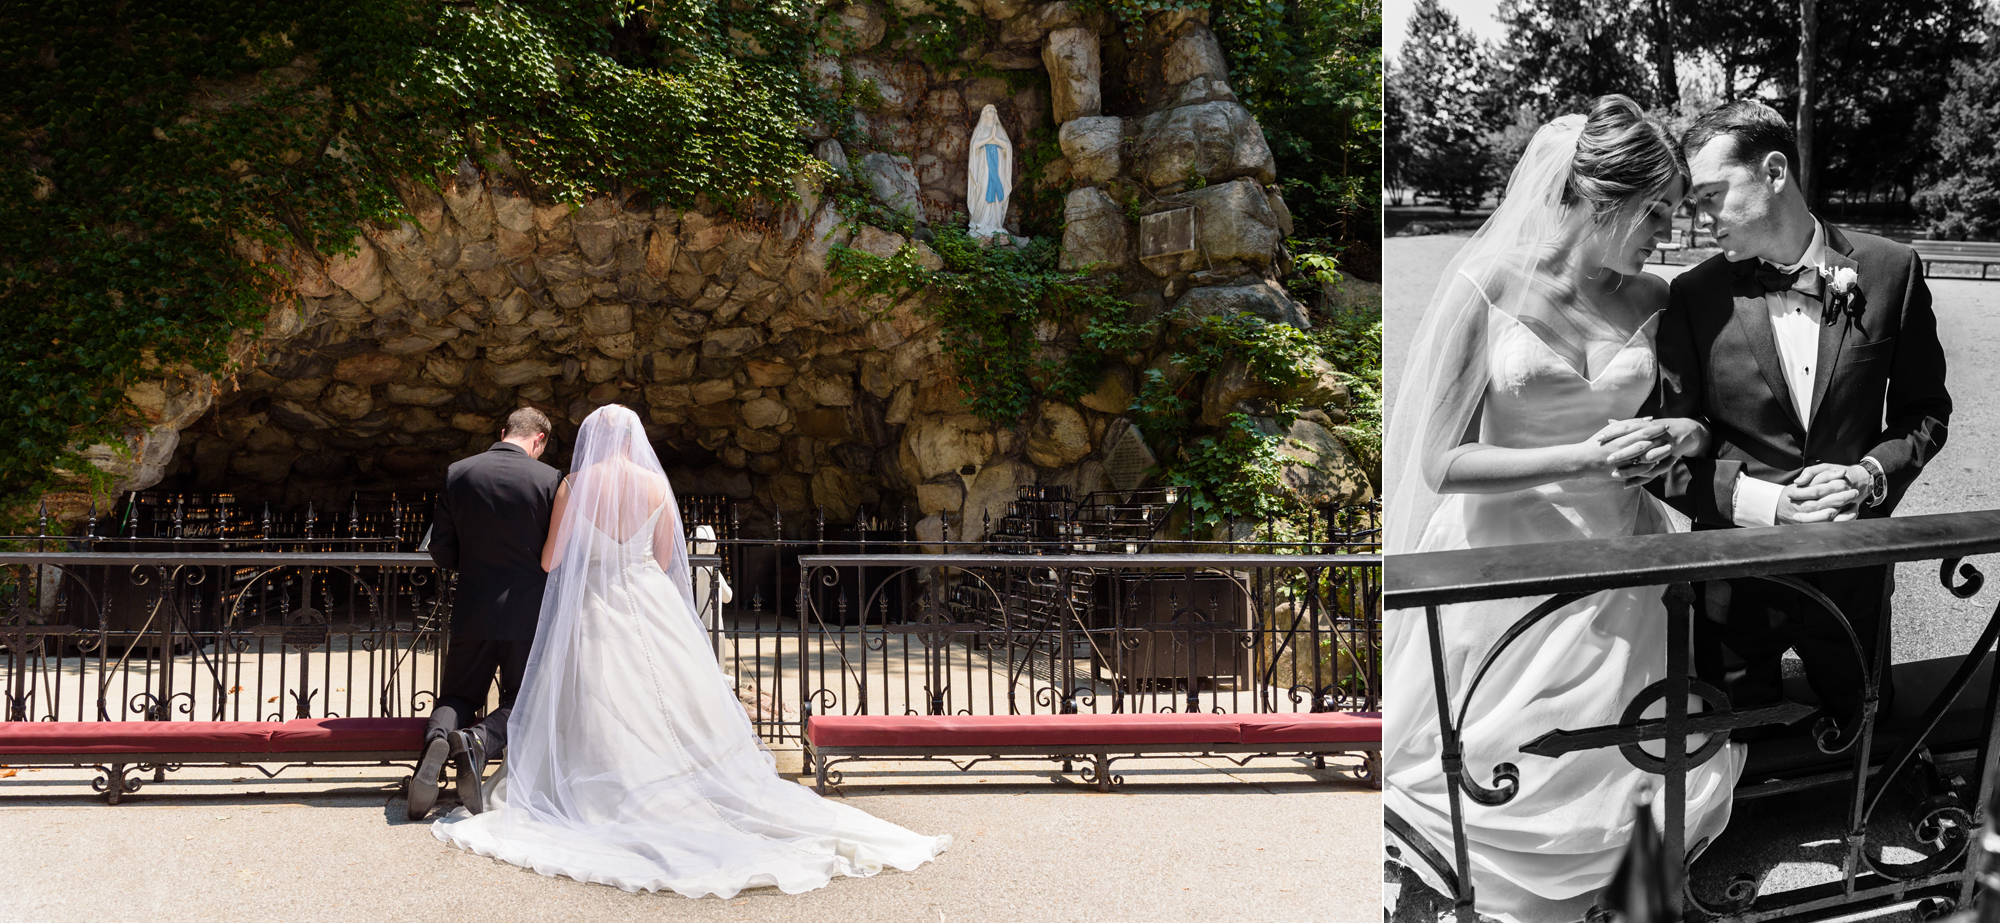 Bride & Groom at the Grotto after their wedding ceremony at the Basilica of the Sacred Heart on the campus of the University of Notre Dame